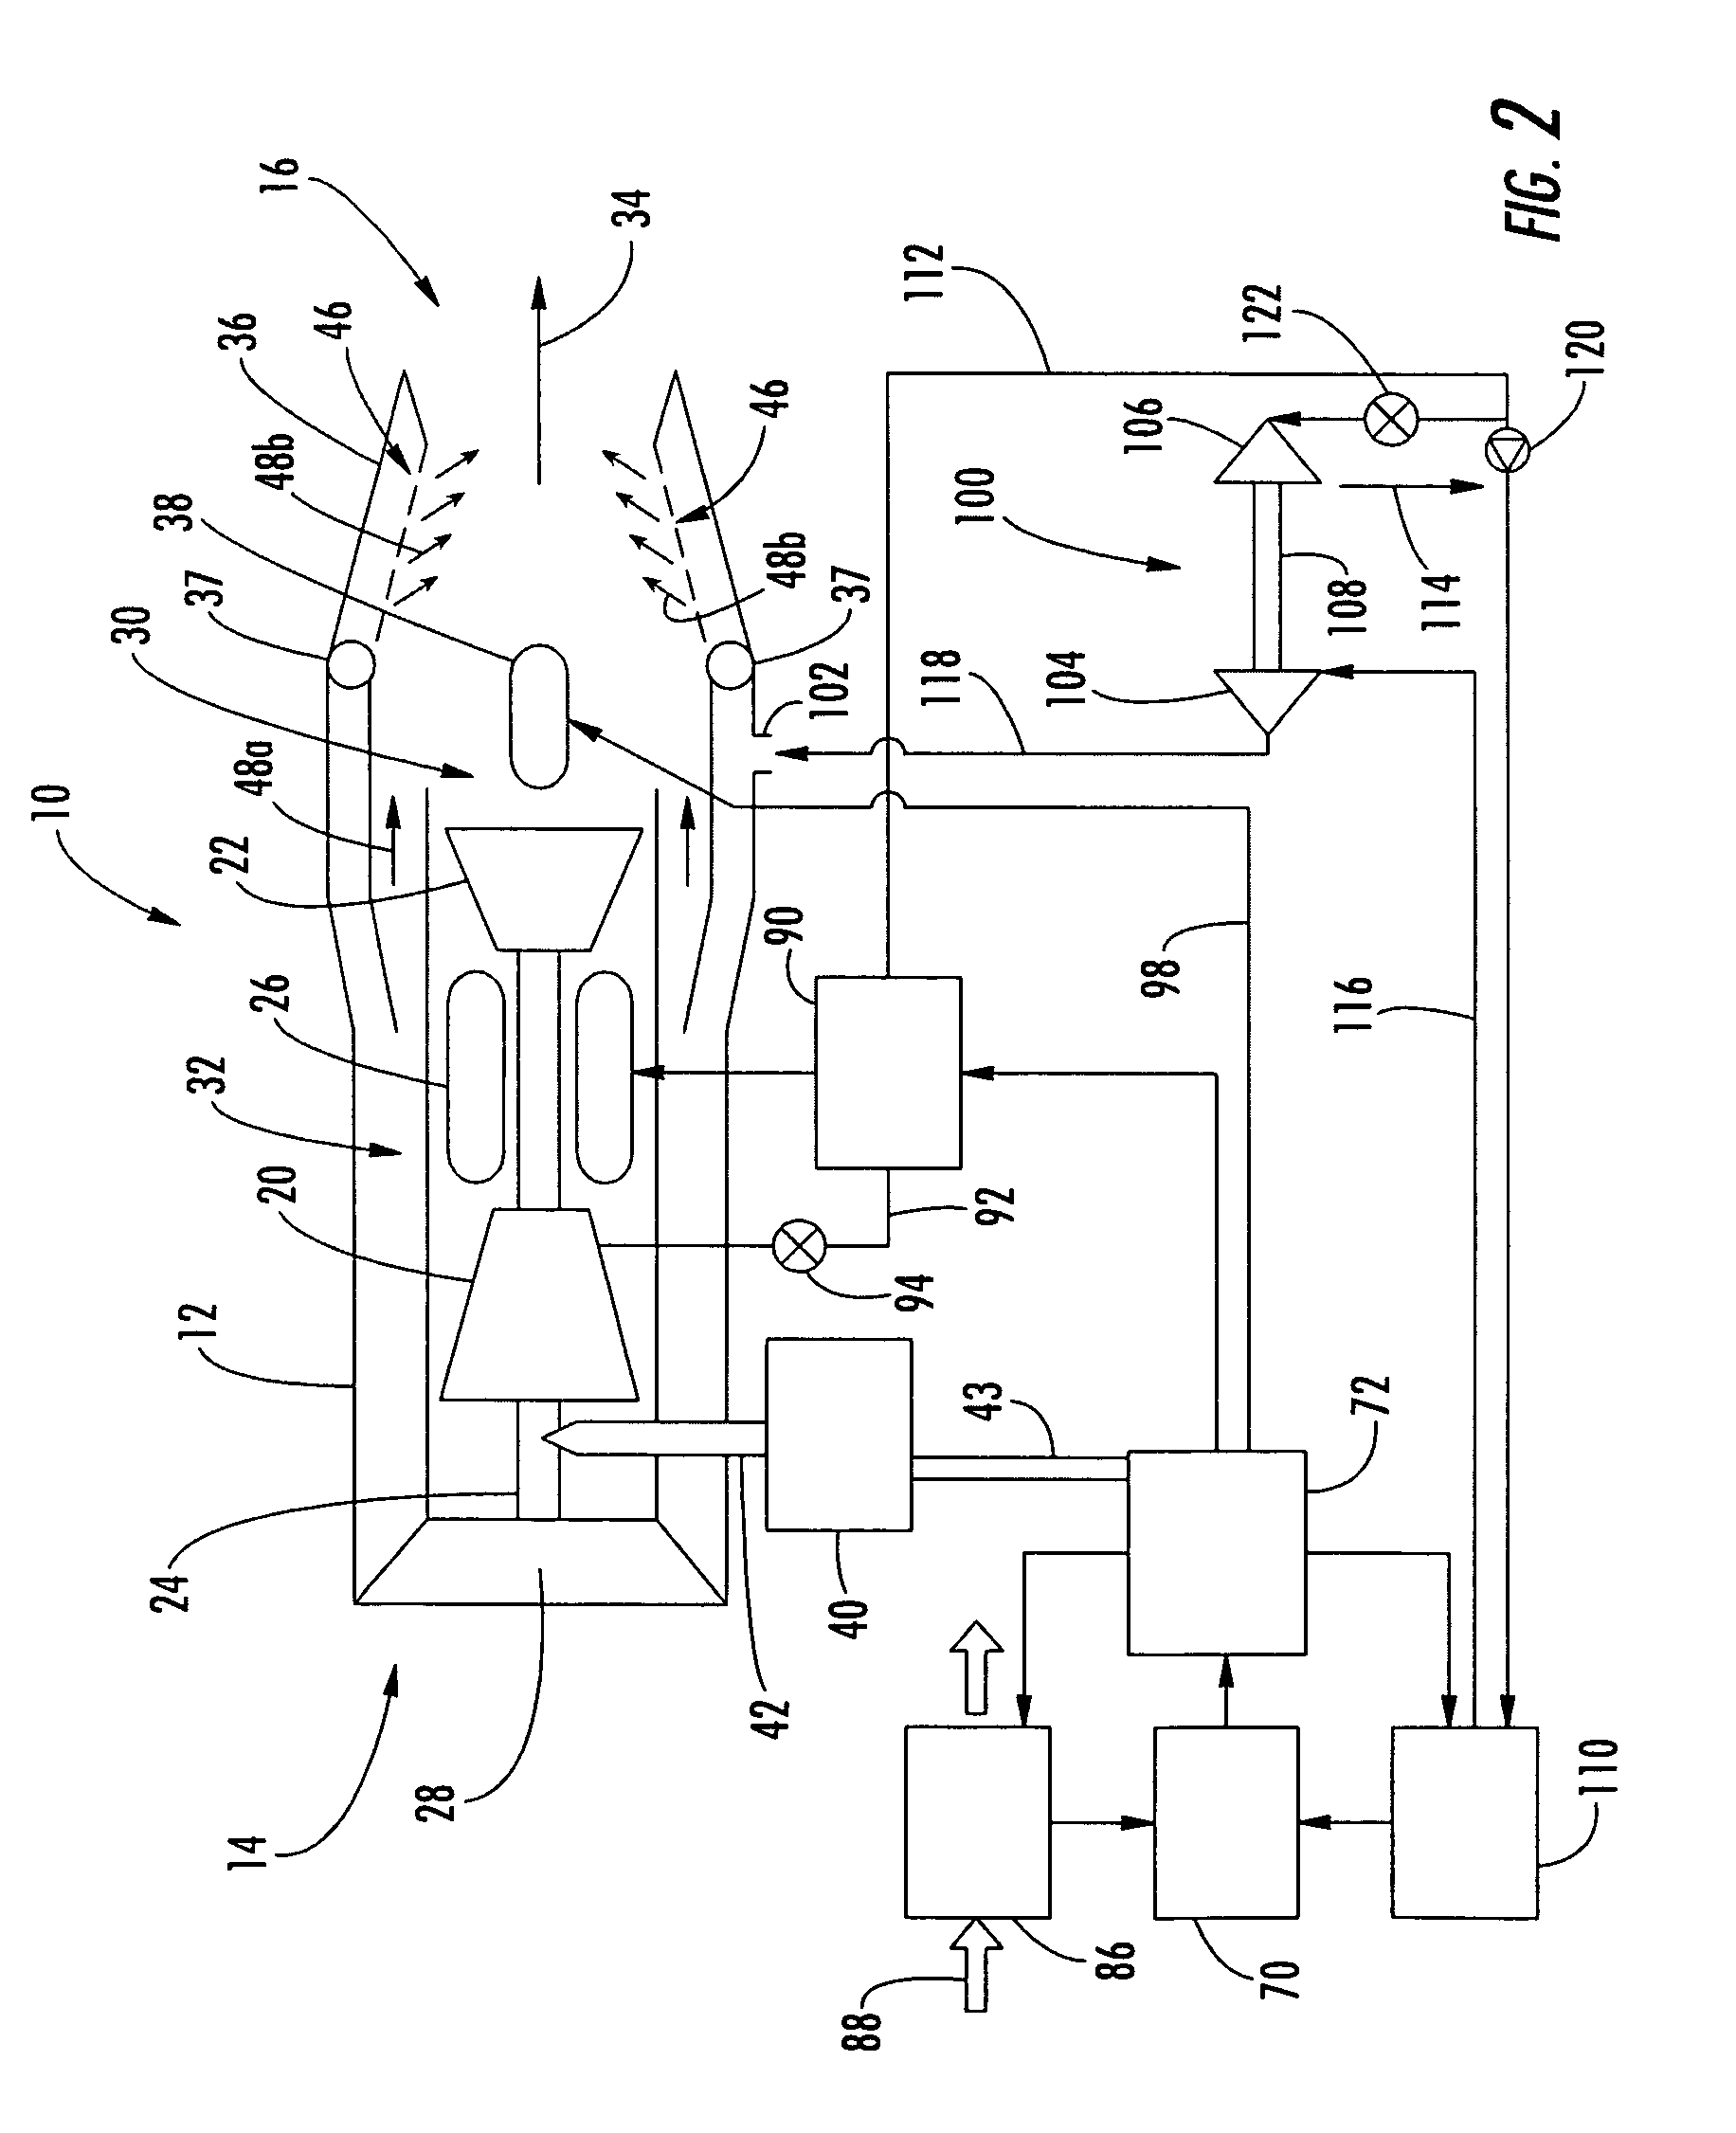 System and method for controlling the temperature and infrared signature of an engine